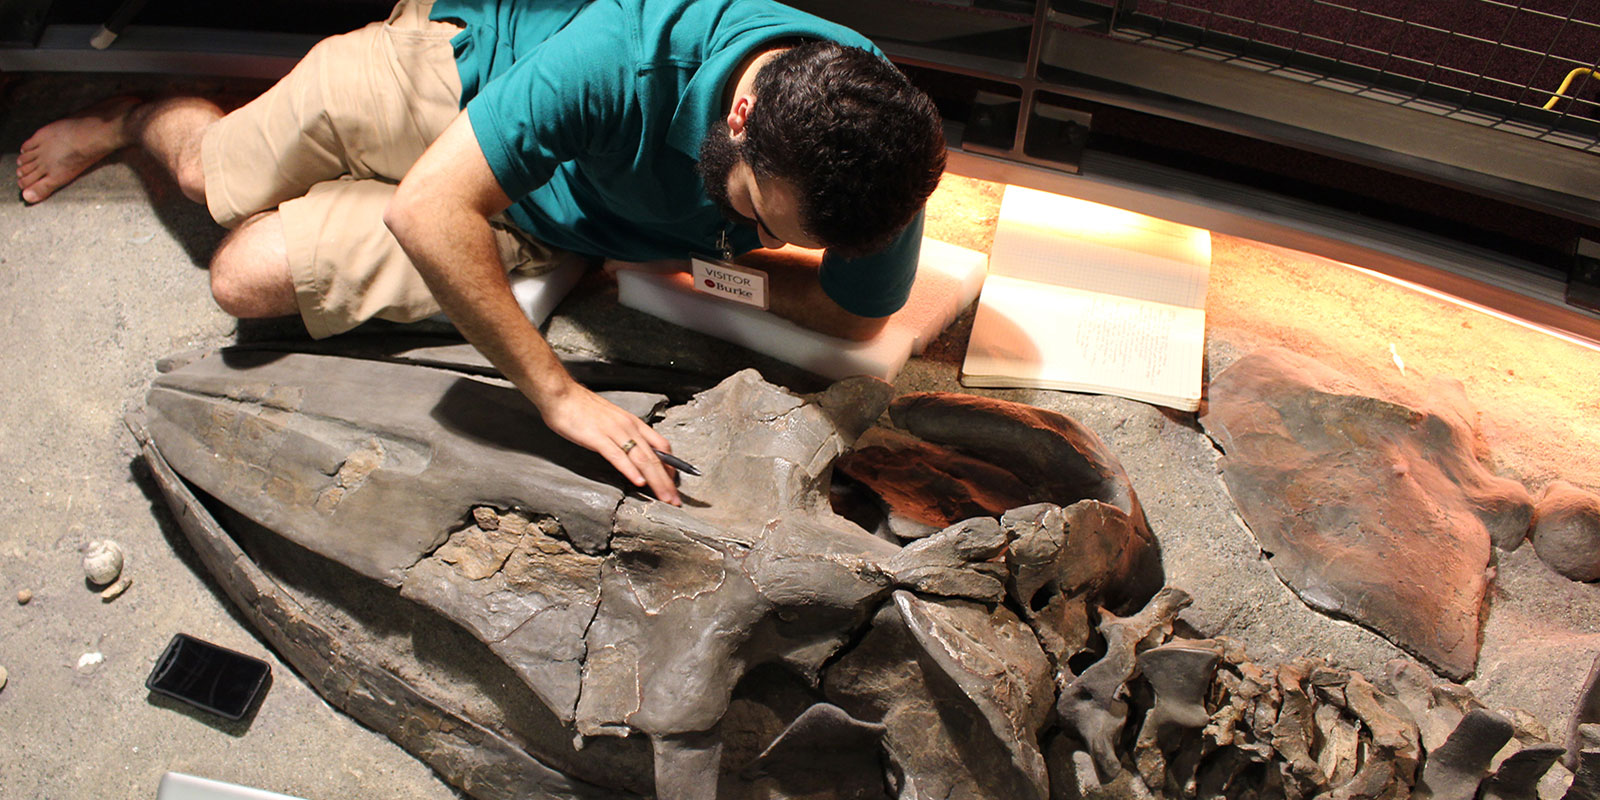 a young man lays next to a fossilized whale skeleton to examine it closely